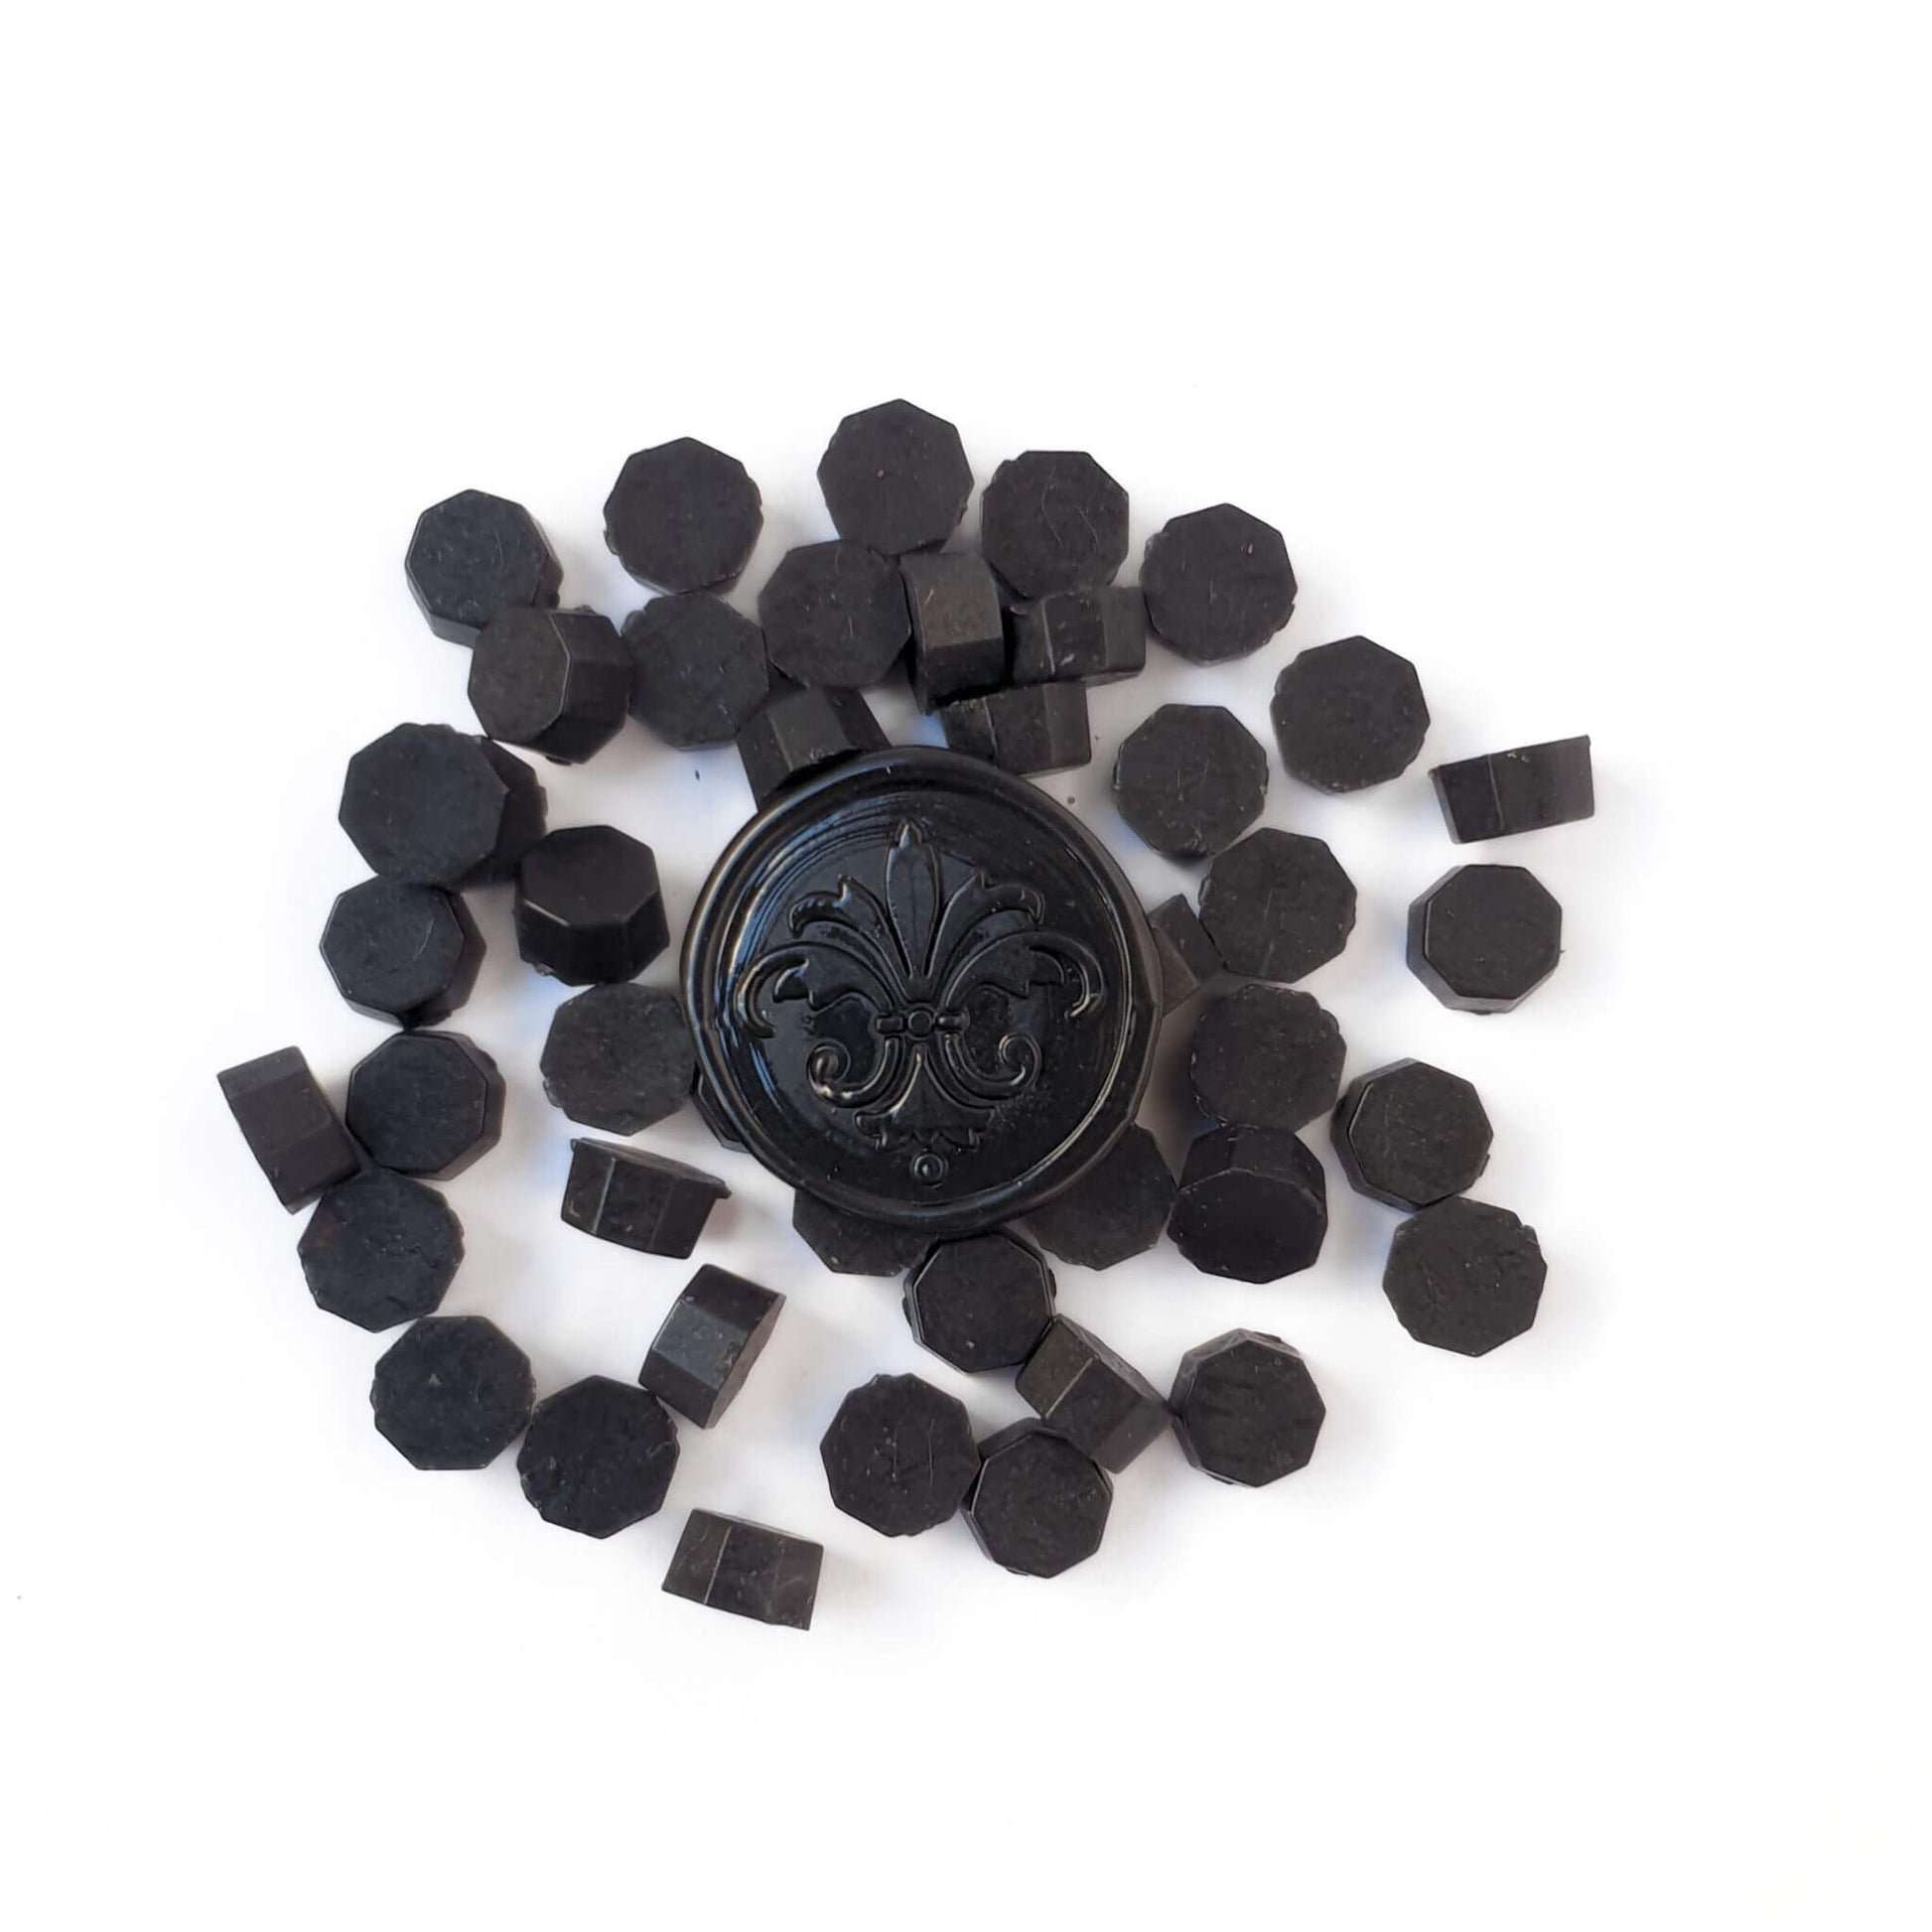 Black octagonal shaped sealing wax beads scattered, with a black wax seal in the middle